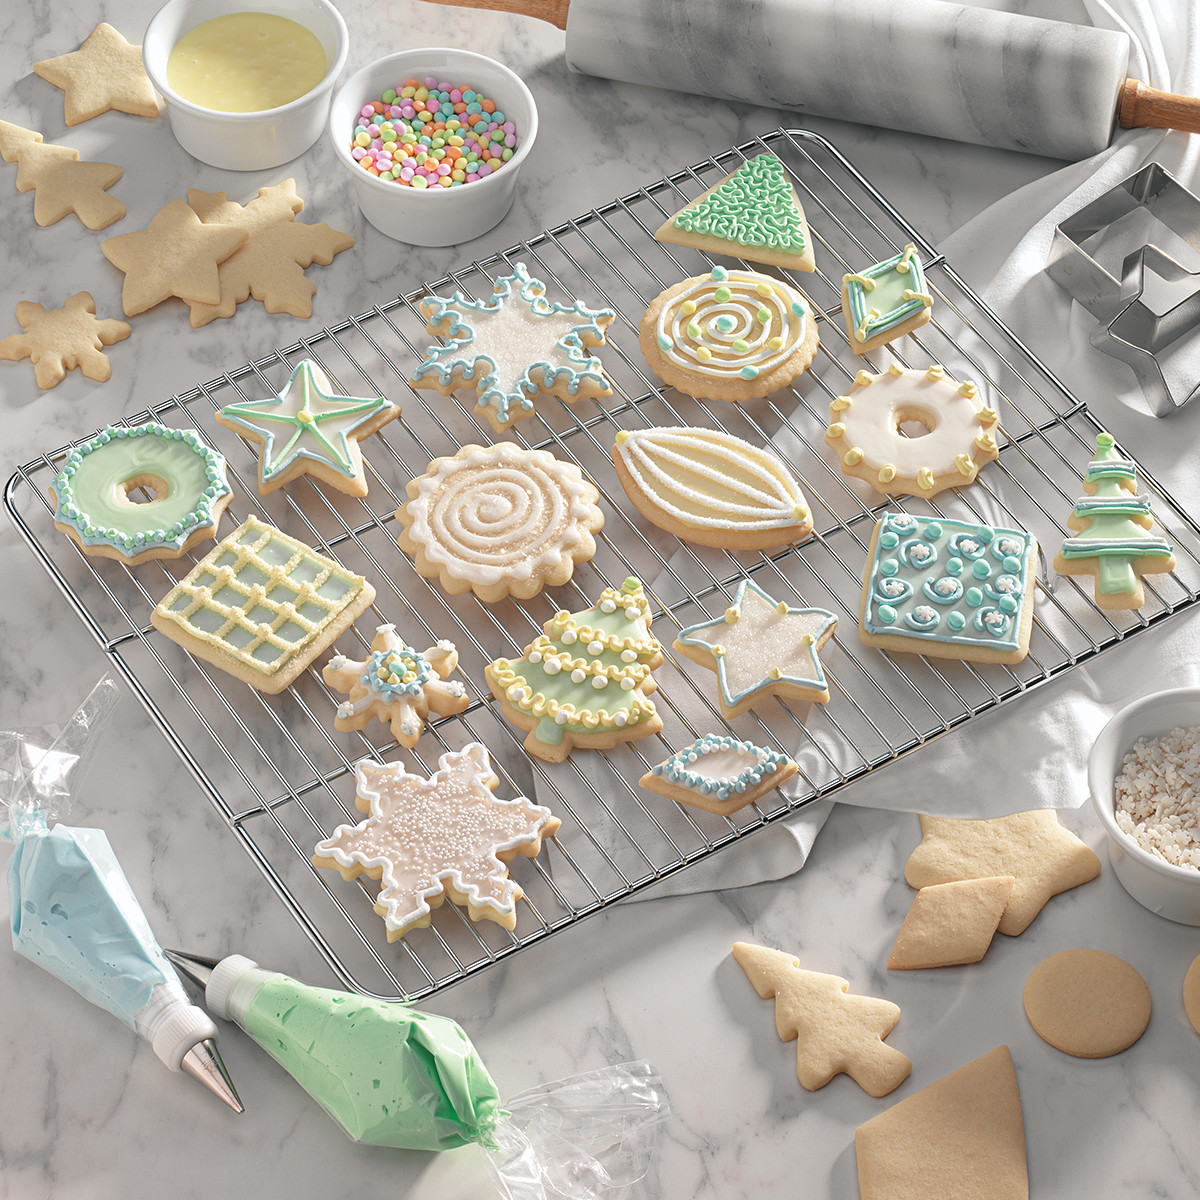 Decorate Christmas Cookies
 9 Easy Christmas Cookie Decorating Ideas